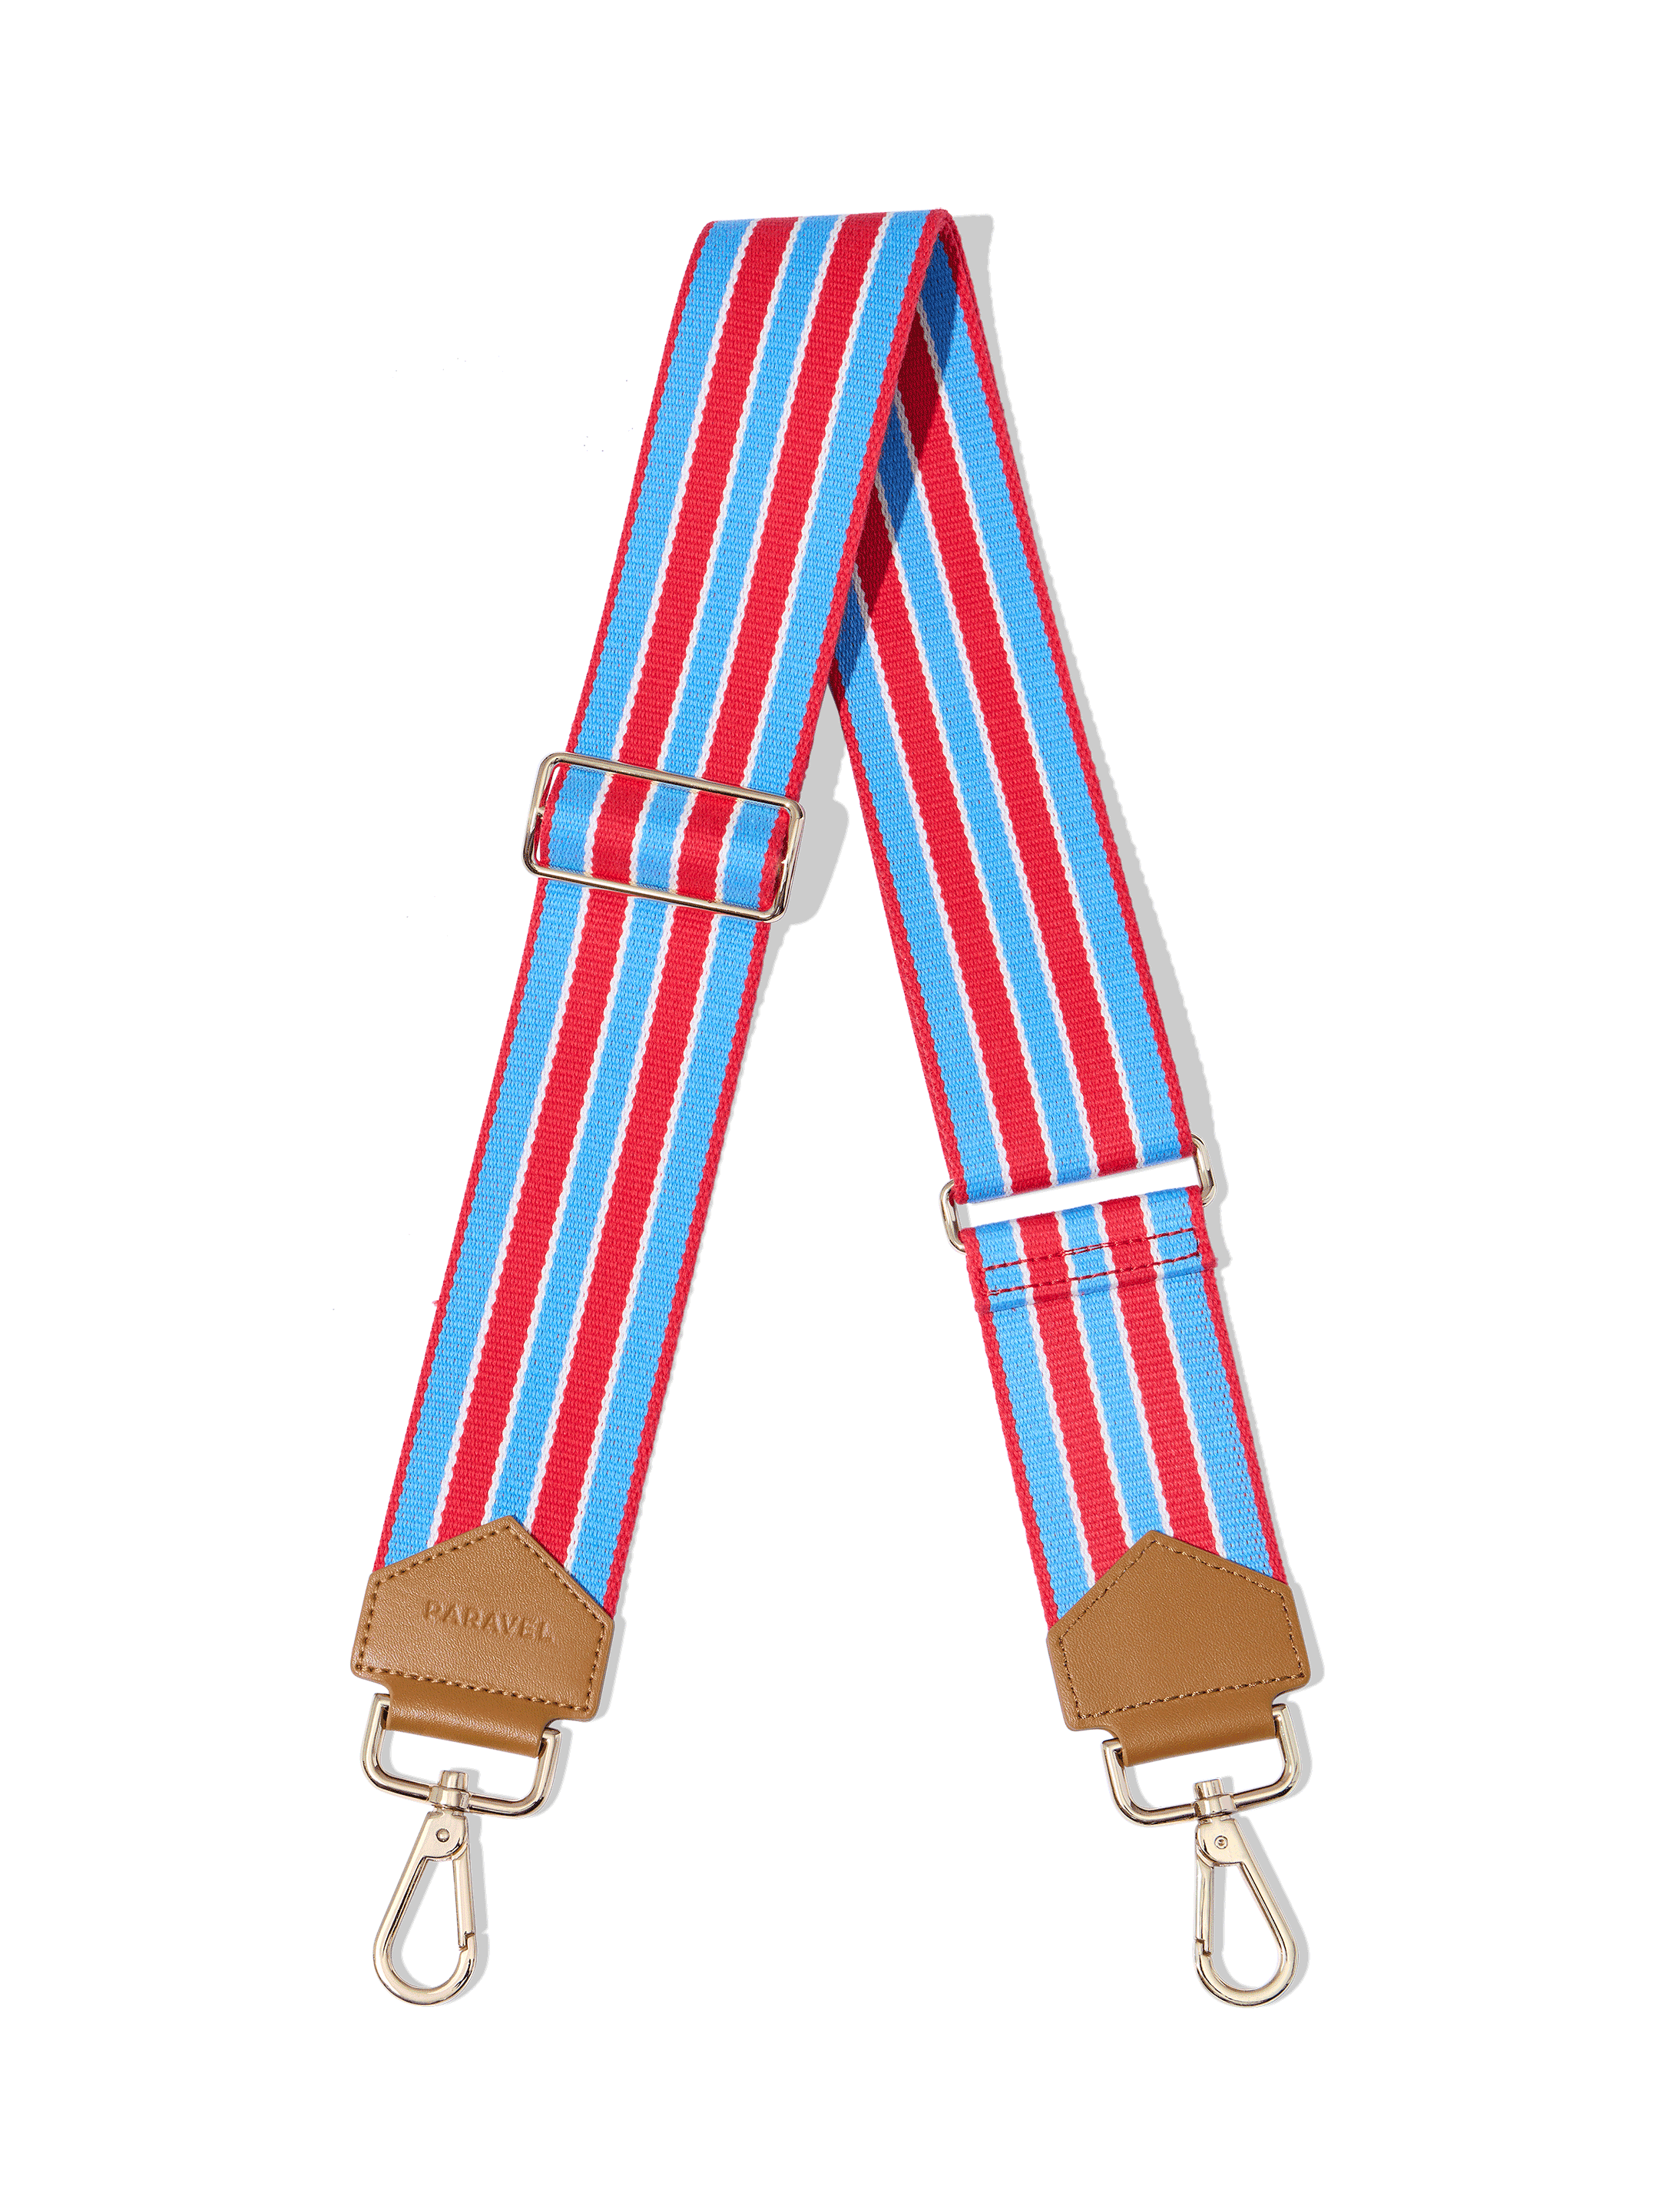 Red, White and Blue Striped Work Suspenders